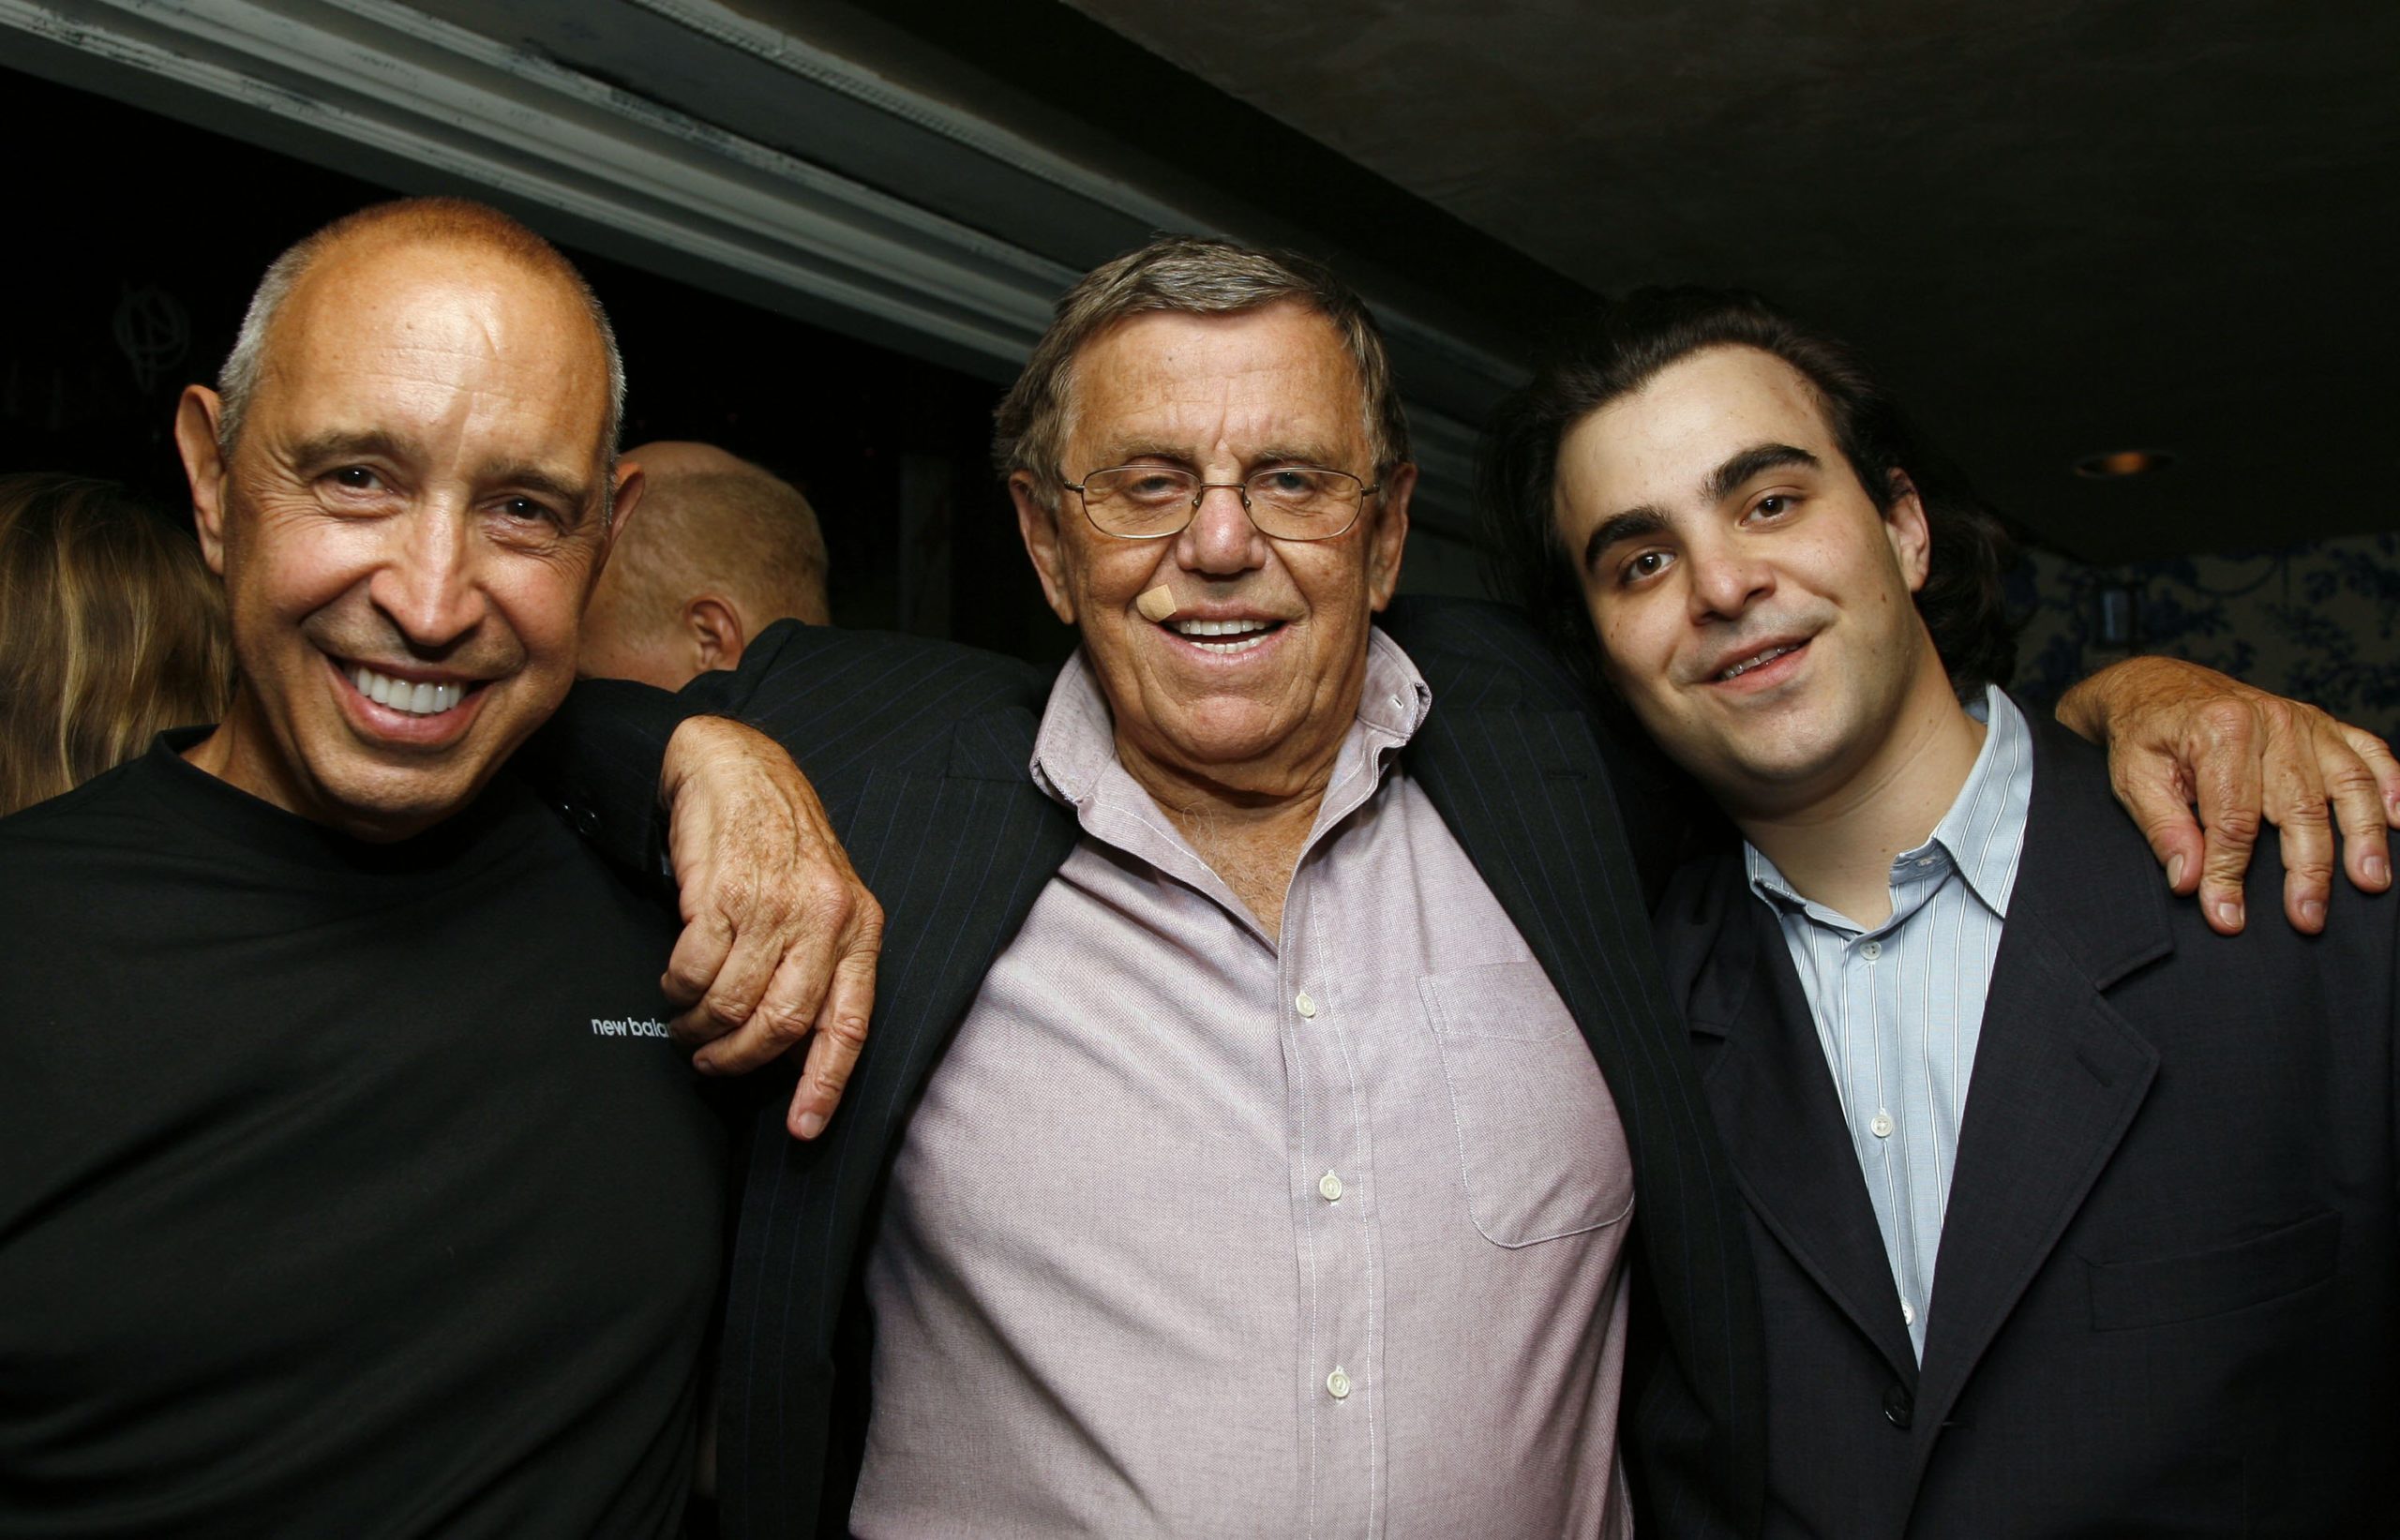 NEW YORK - JULY 27: (L-R) Tom Russo, Dr. Henry Jarecki and director Nicholas Jarecki attend the preview of "The Box" on July 27, 2006 in New York City. (Photo by Fernando Leon/Getty Images for The Box)